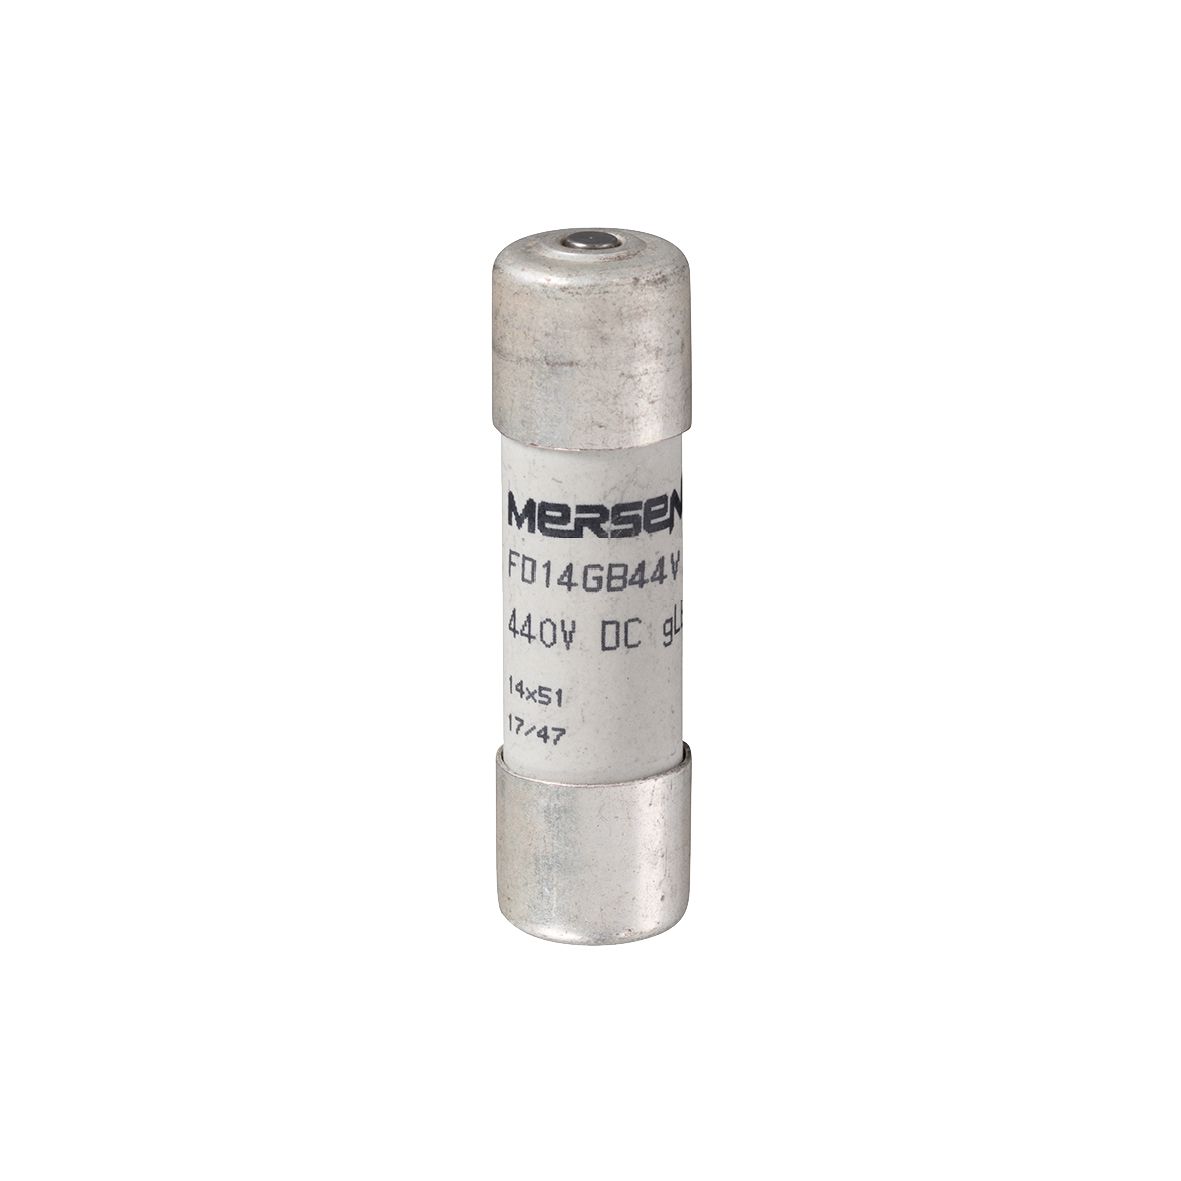 H075723 - Cylindrical fuse-link GRB 440VDC 14x51, 16A with striker